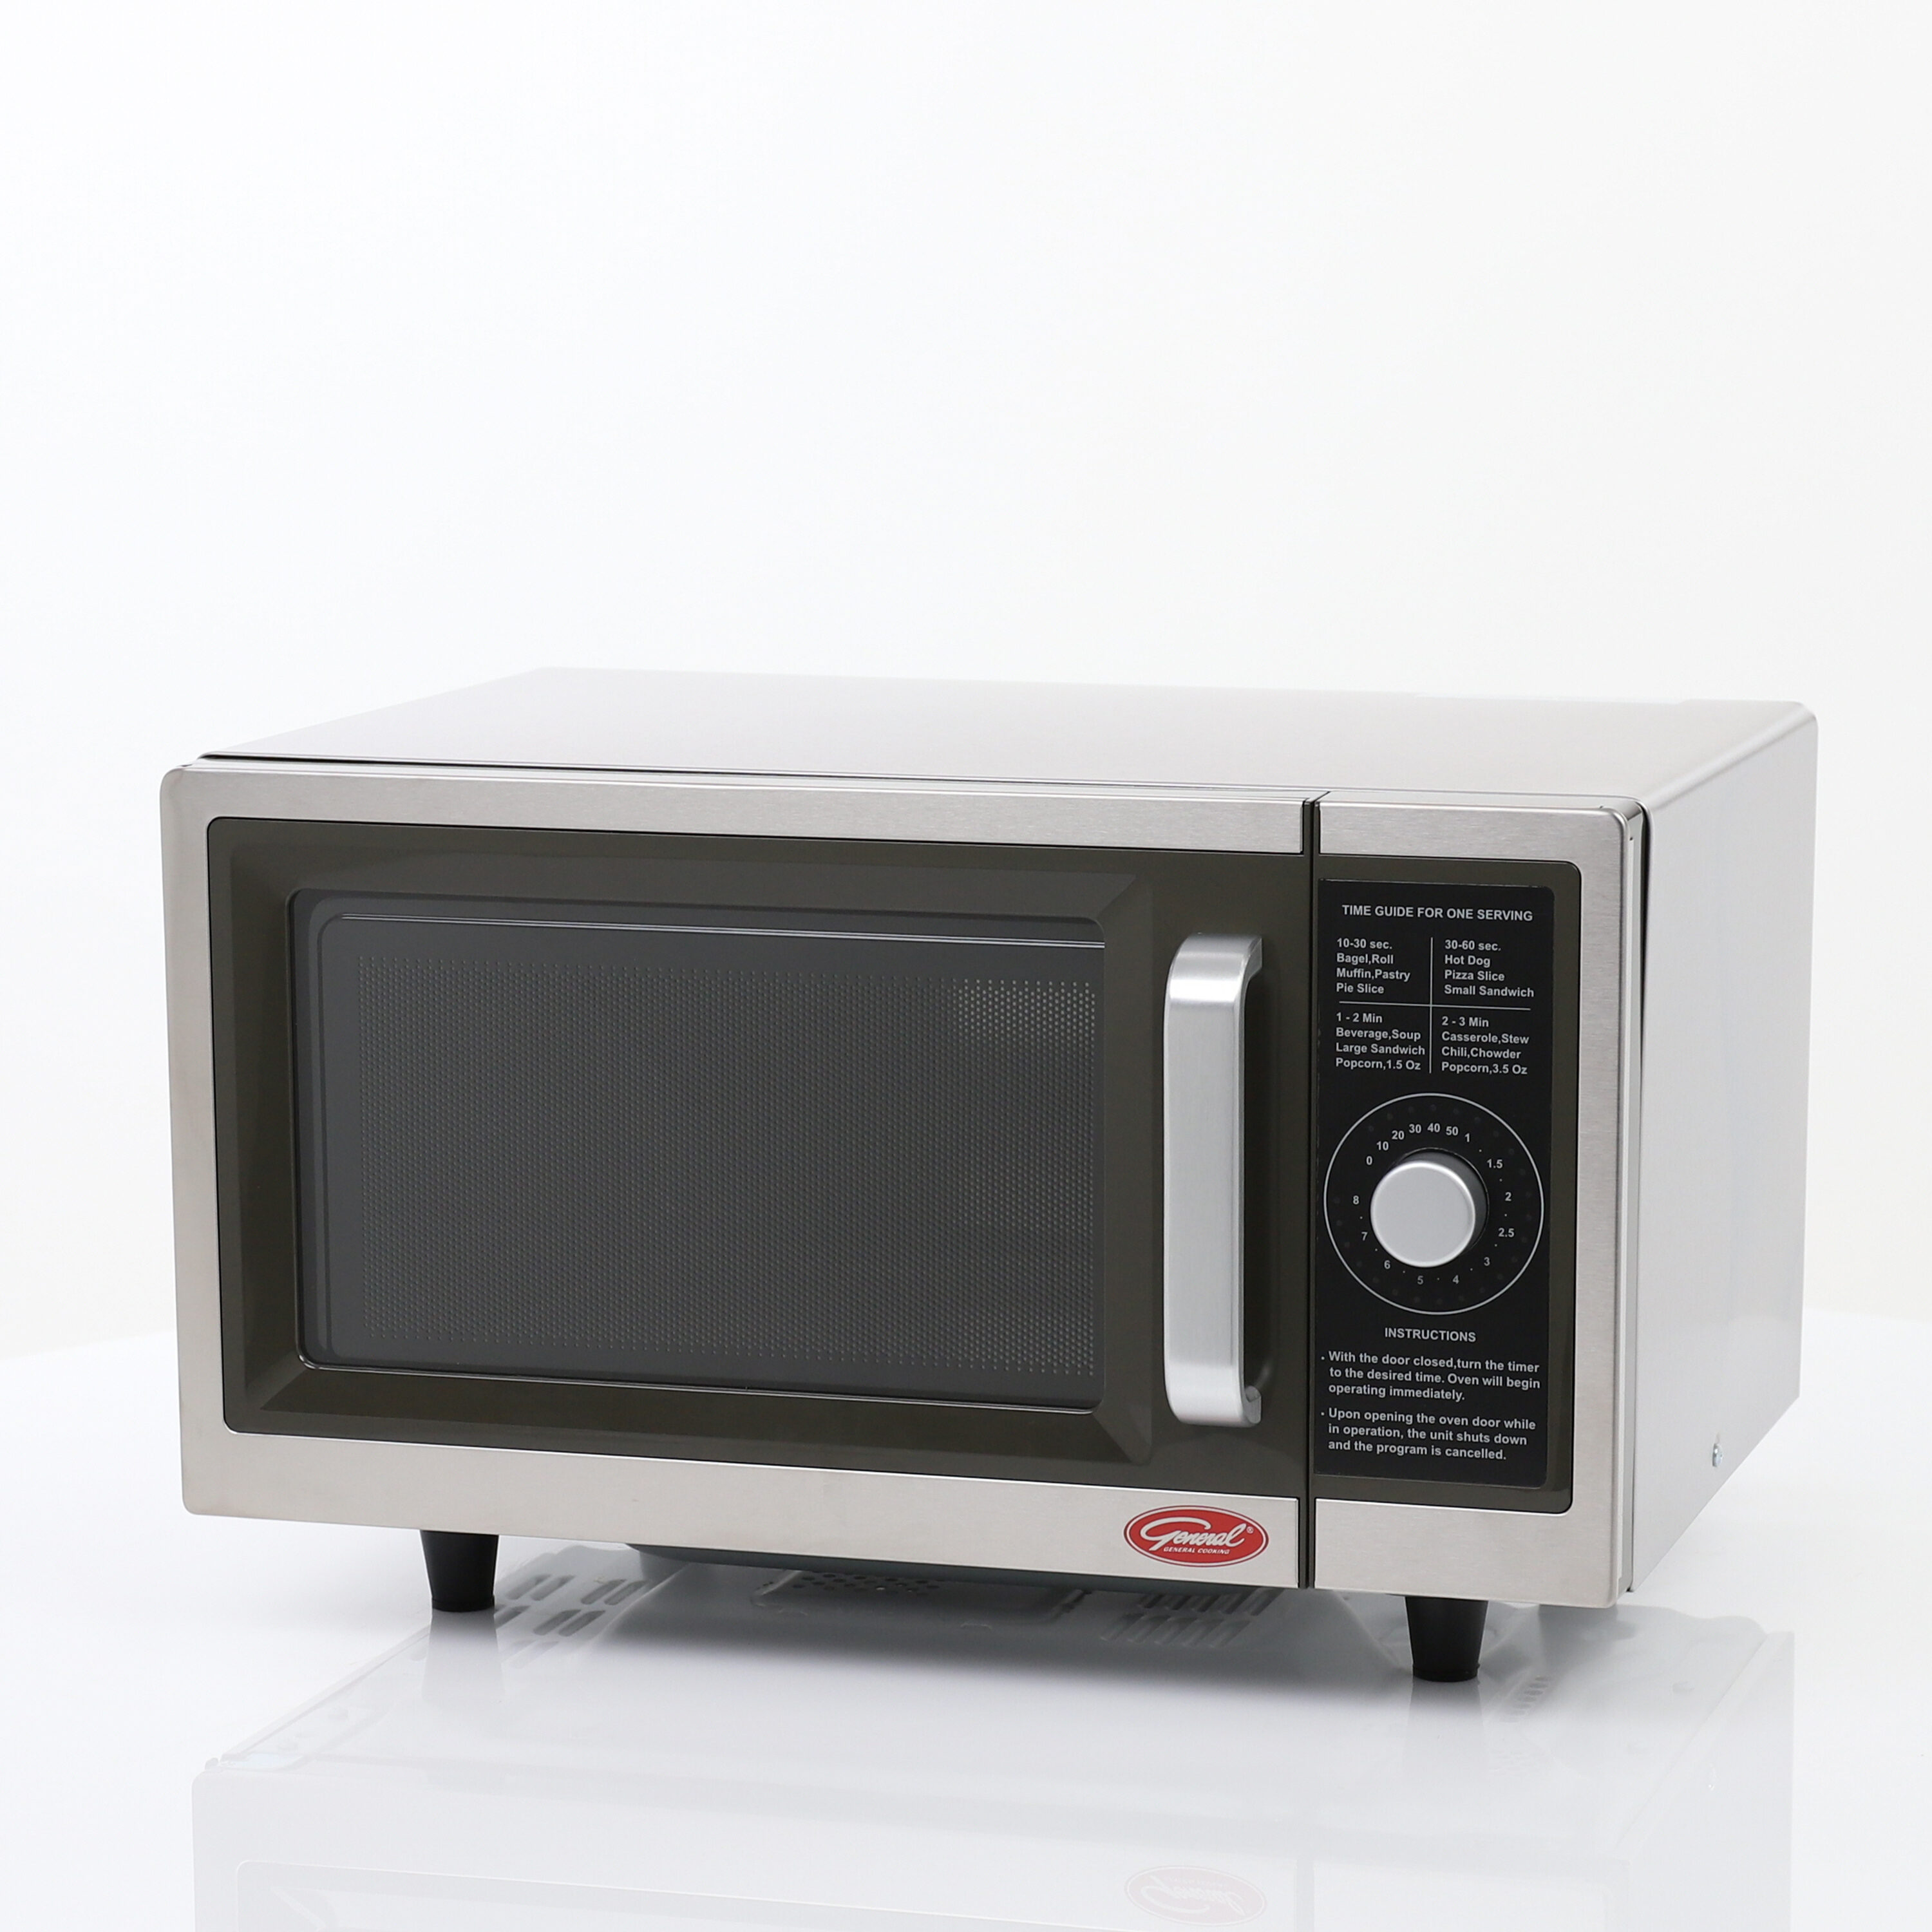  COMMERCIAL CHEF 1.6 Cubic Foot Microwave with 10 Power Levels, Small  Microwave with Push Button, 1000 Watt Microwave with Digital Control  Panels, Countertop Microwave with Timer, Stainless Steel : Home & Kitchen